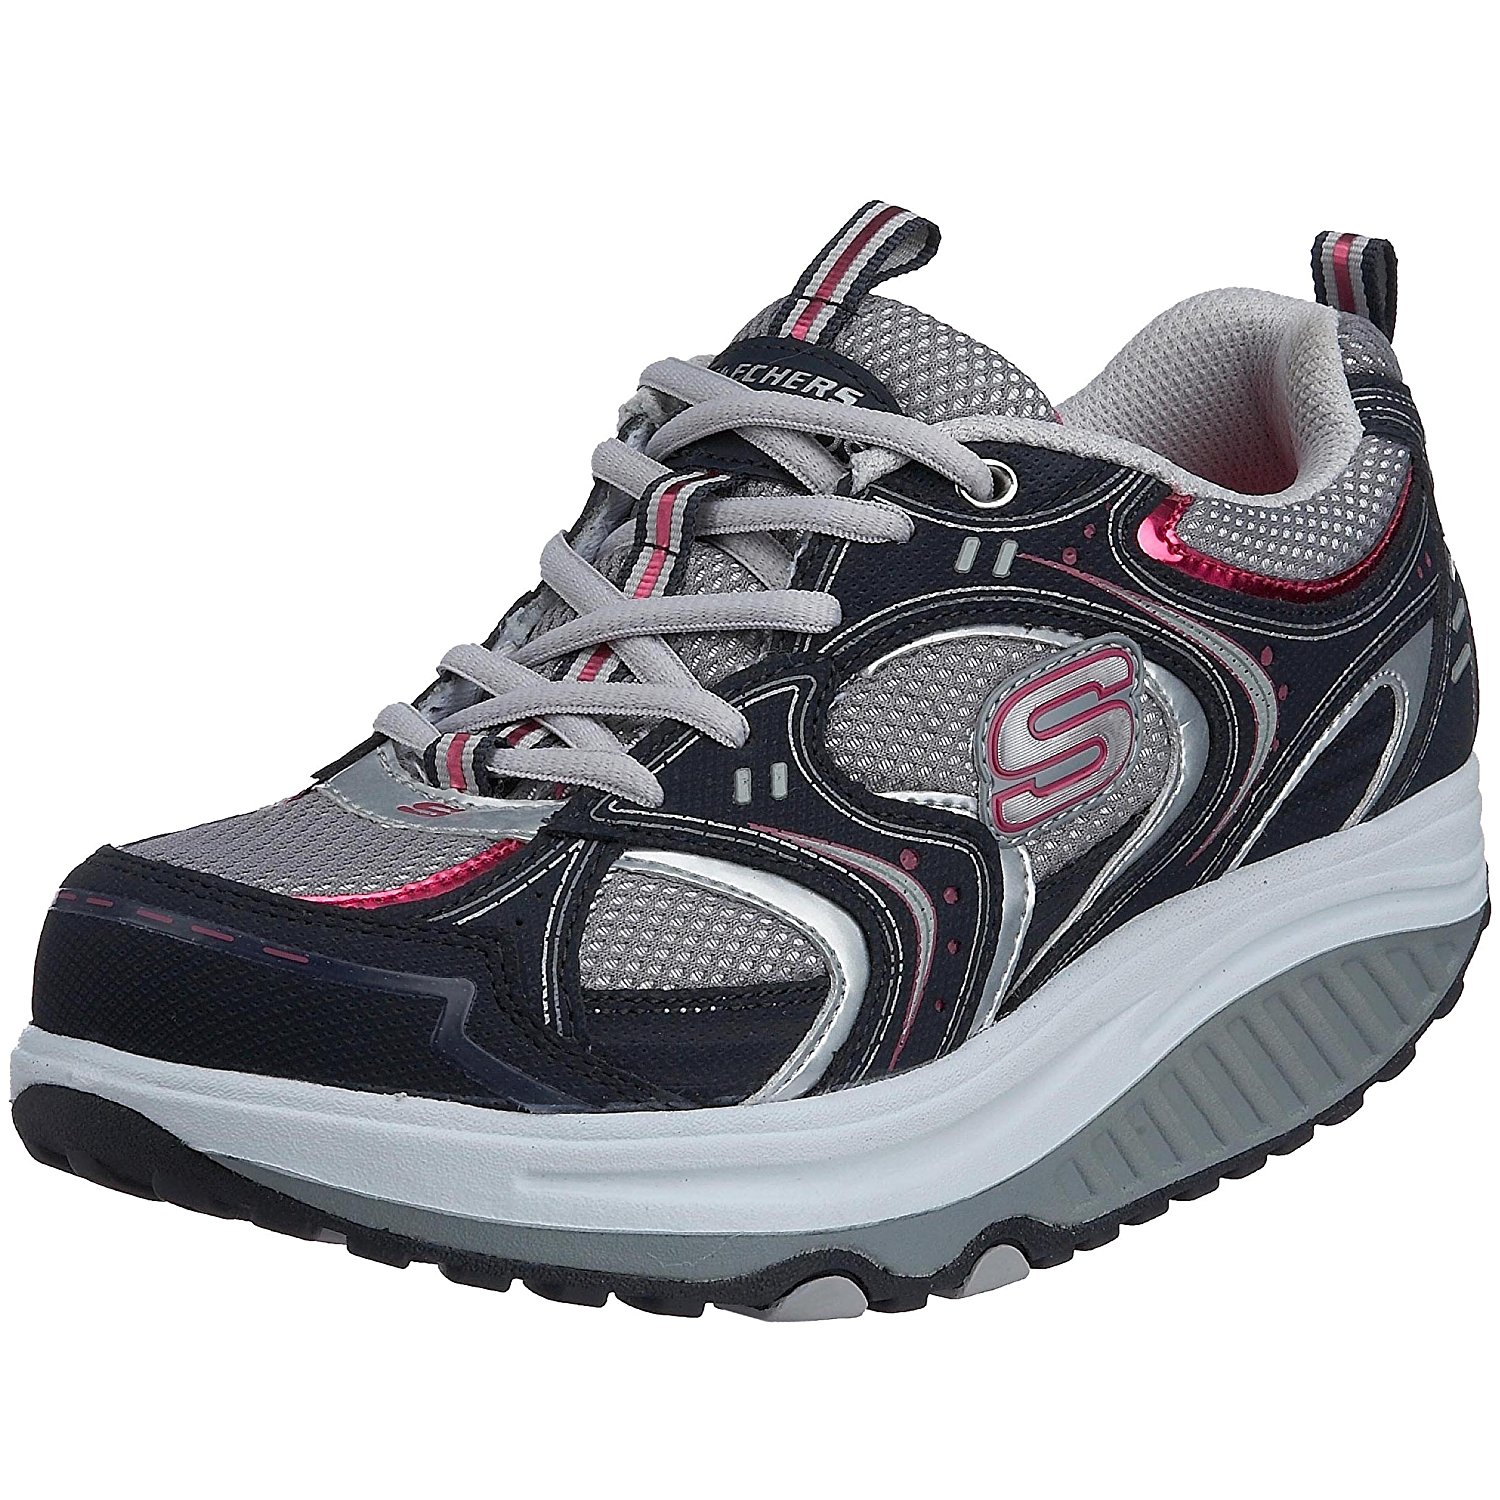 Things to see for getting a skechers shoes – thefashiontamer.com